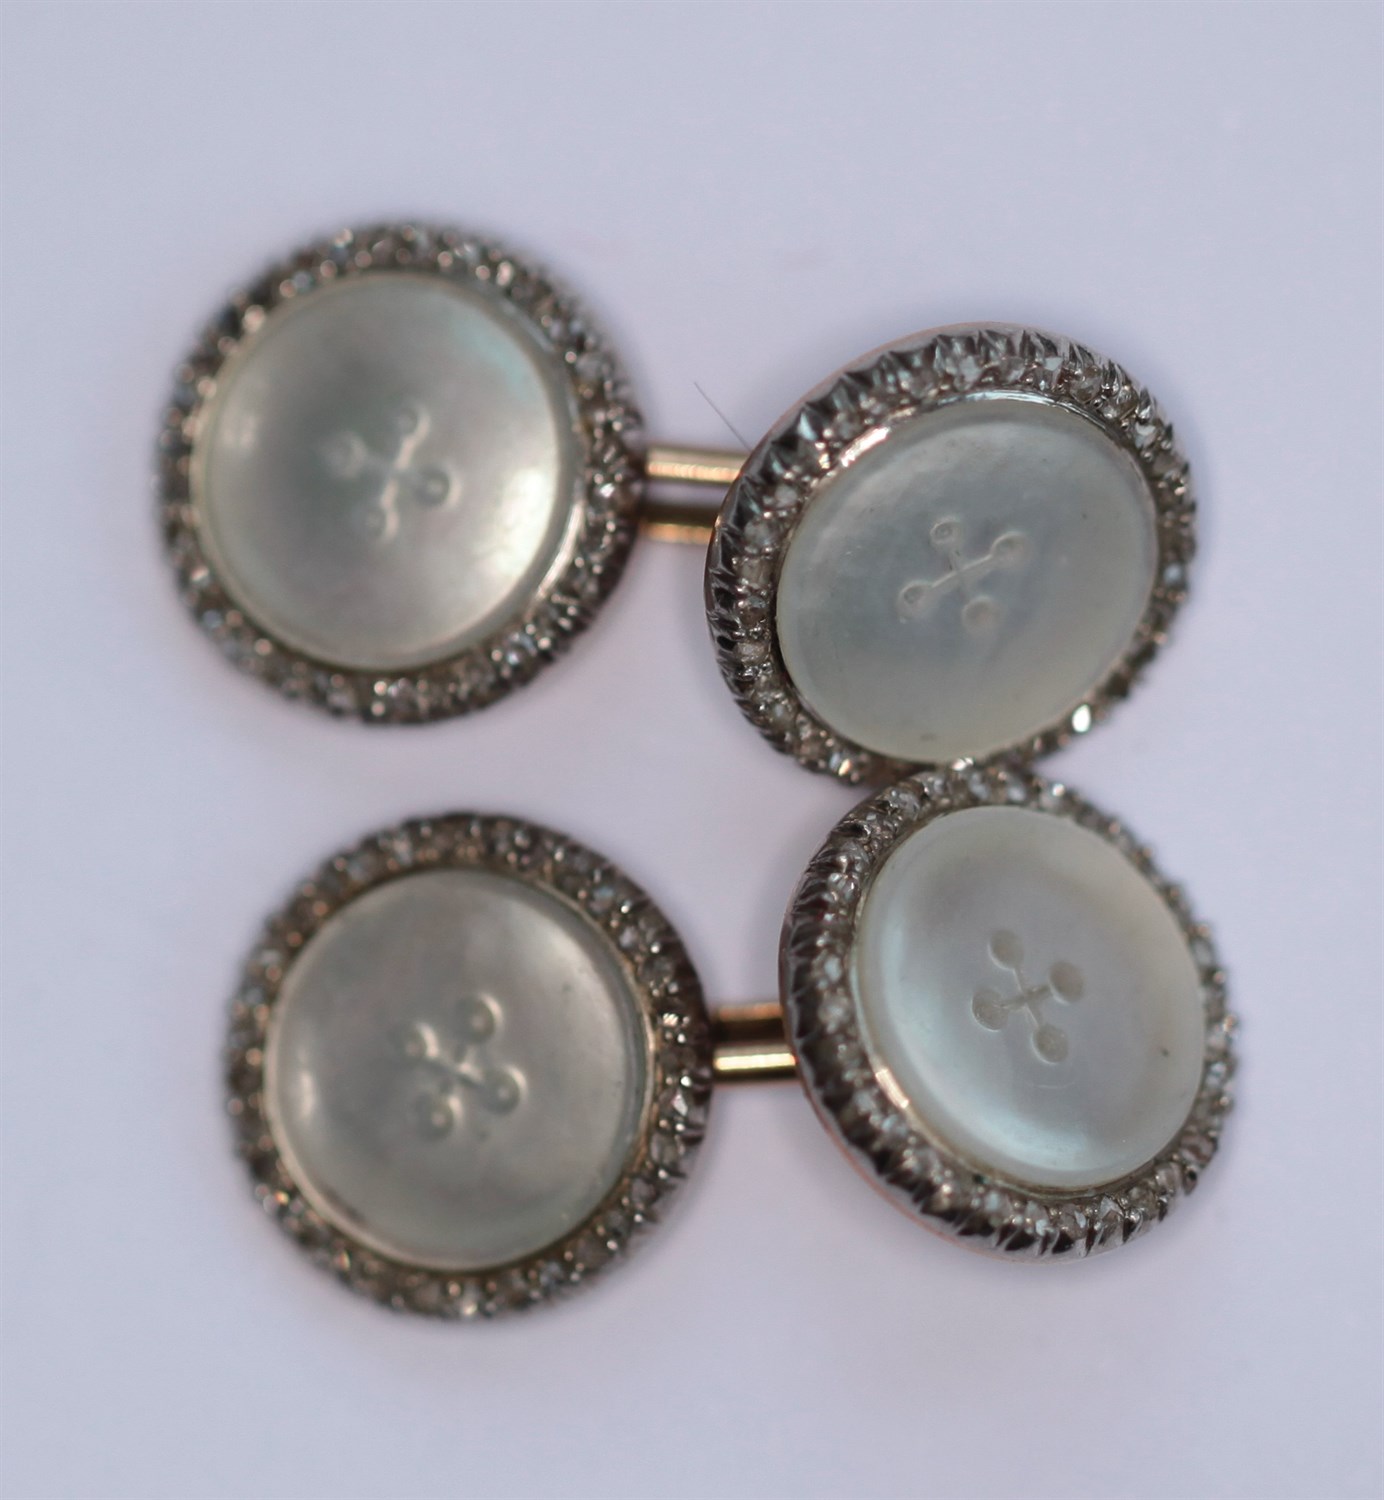 Lot 86 - A pair of early 20th century mother-of-pearl and diamond set cufflinks